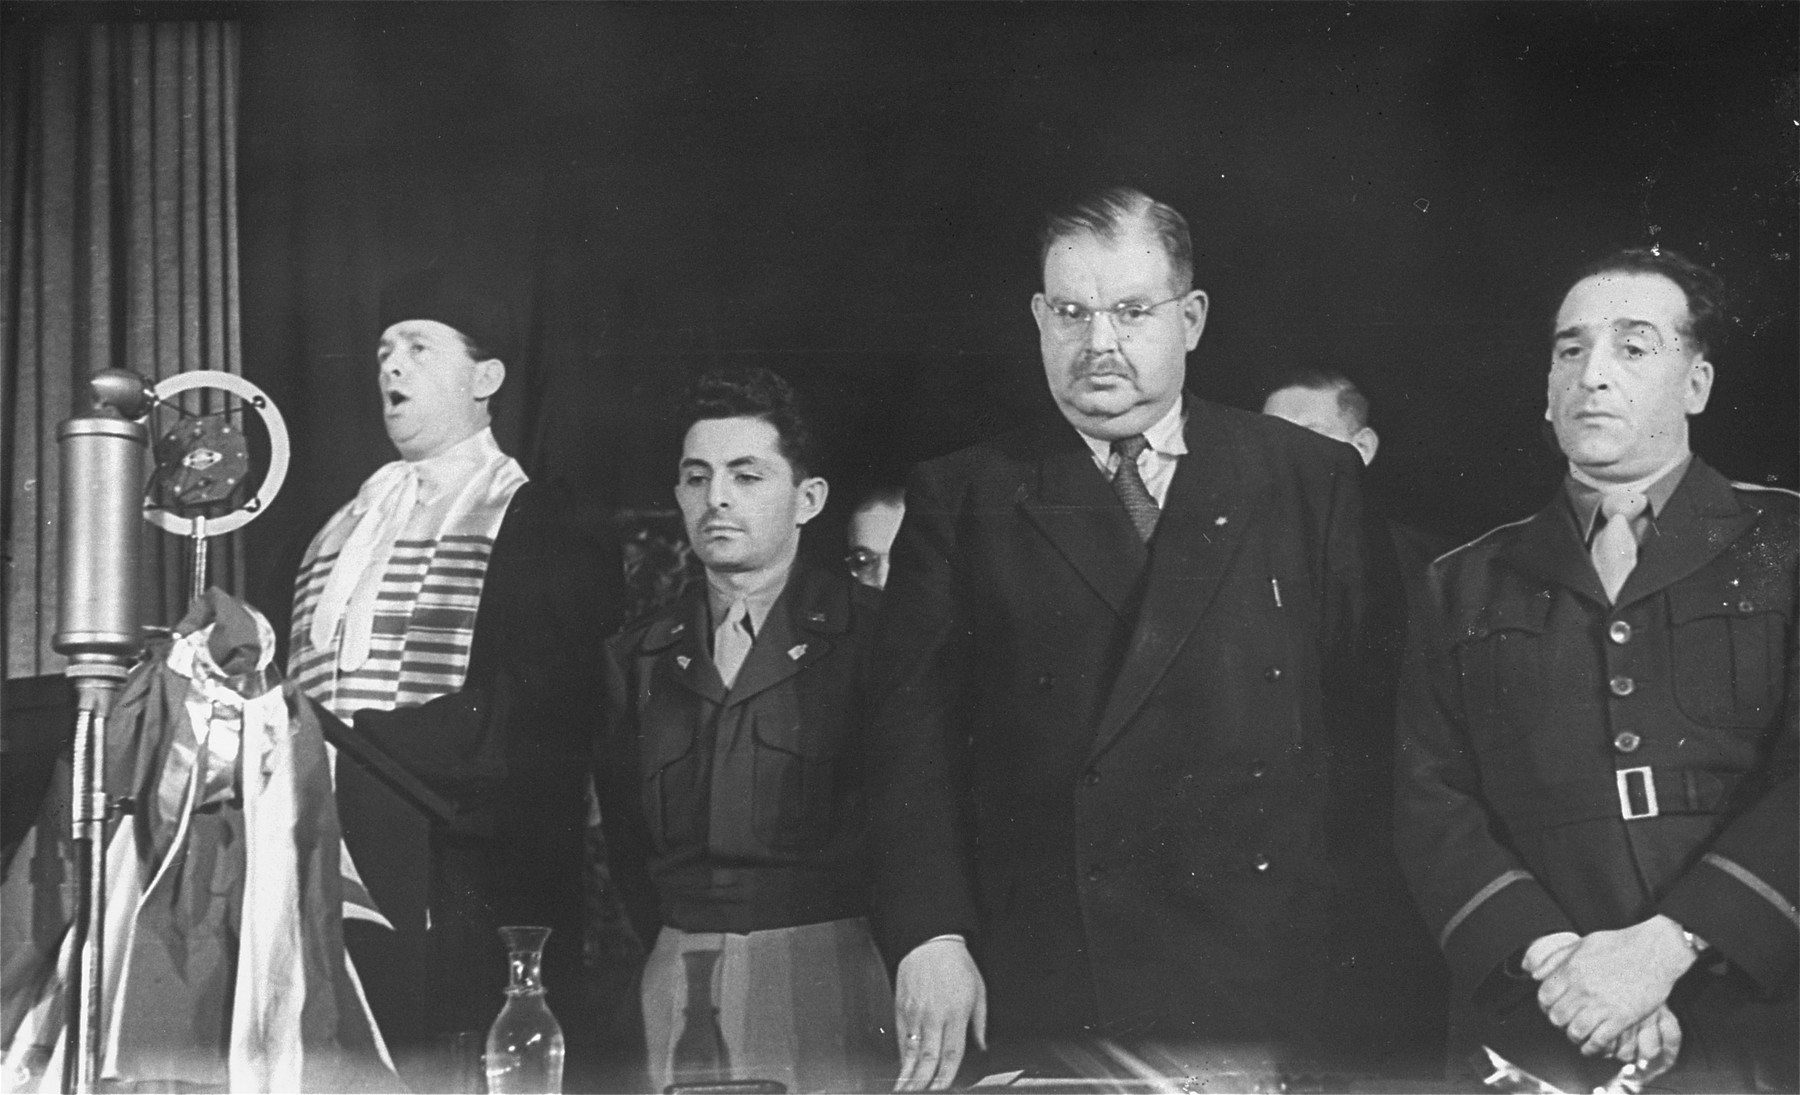 A cantor sings at a public ceremony sponsored by the Central Committee of Liberated Jews in the U.S. Zone of Germany.  

Among those pictured is U.S. Army chaplain Abraham Klausner (second from the left) and Philipp Auerbach (second from the right).